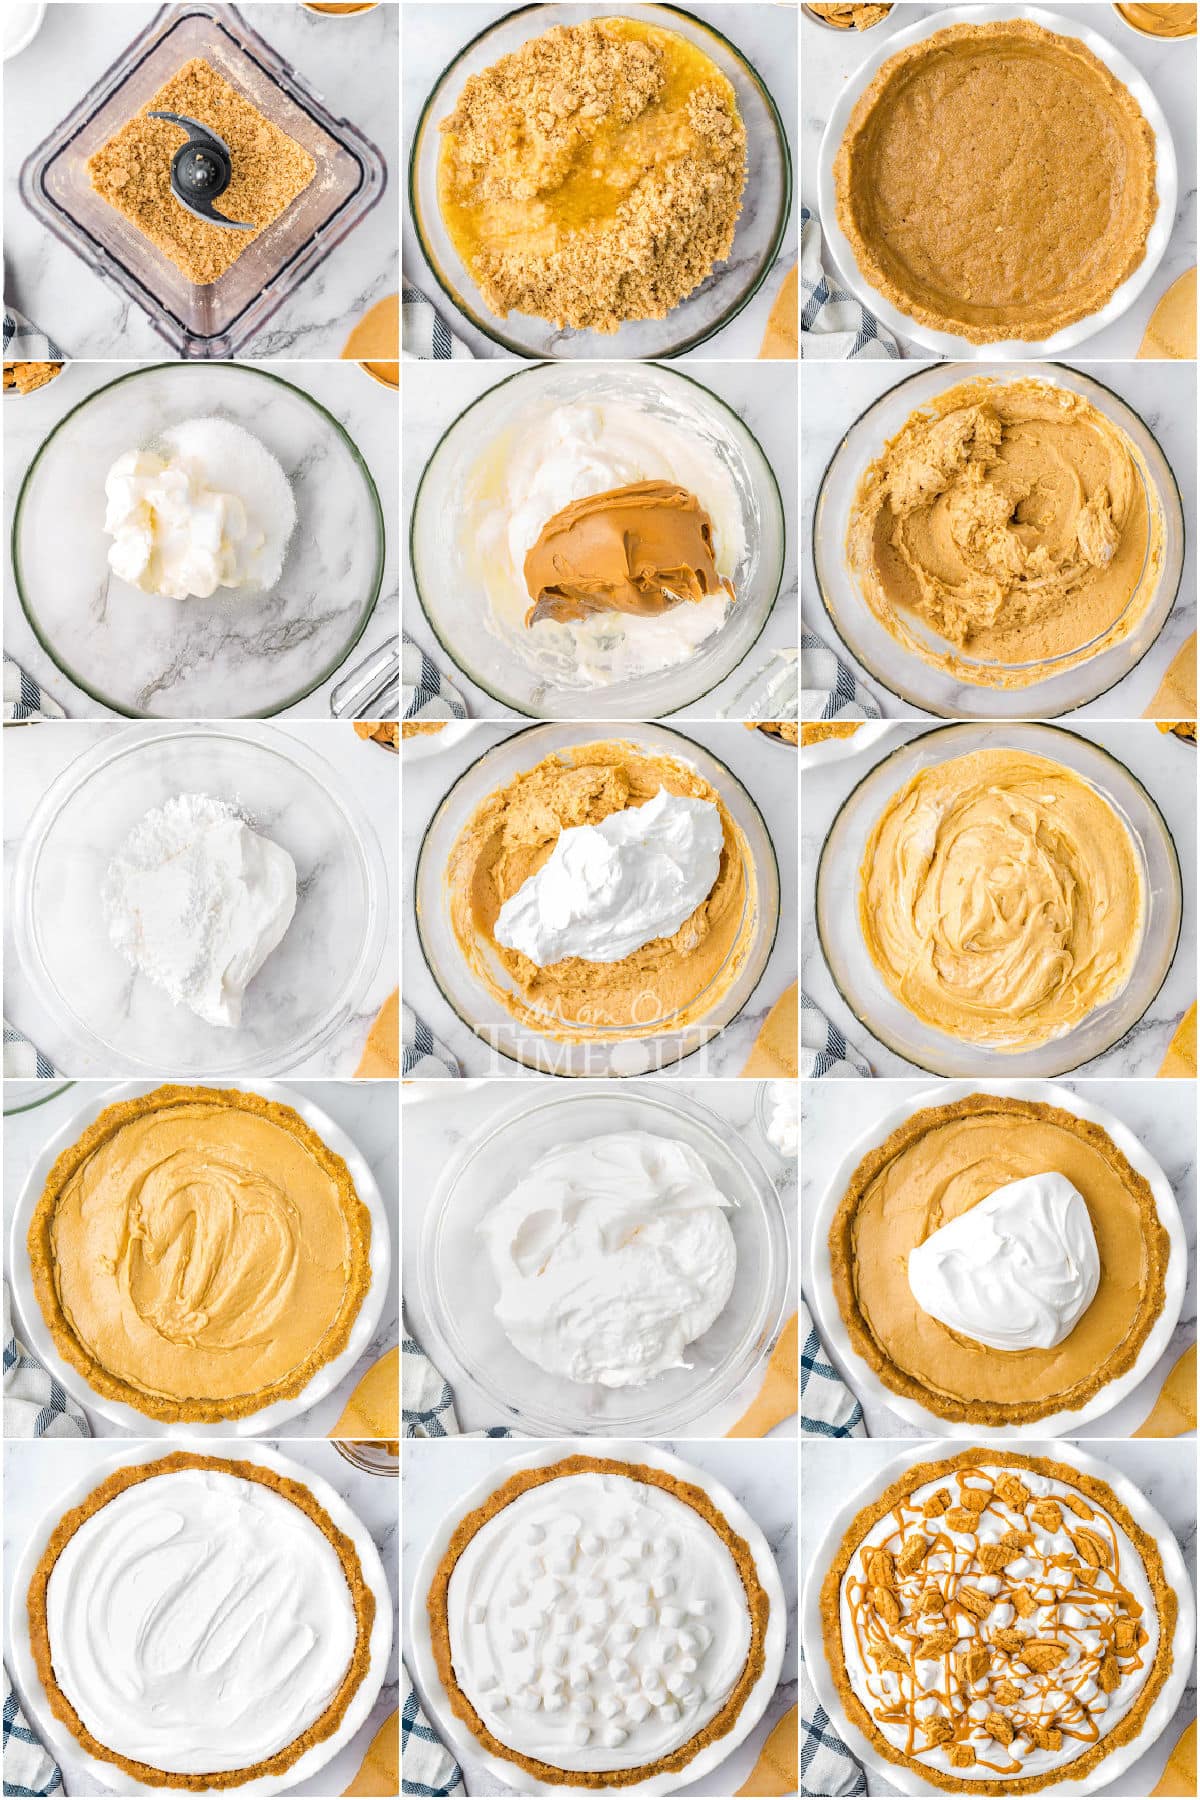 fifteen image collage showing how to make and assemble the fluffernutter pie recipe step by step.